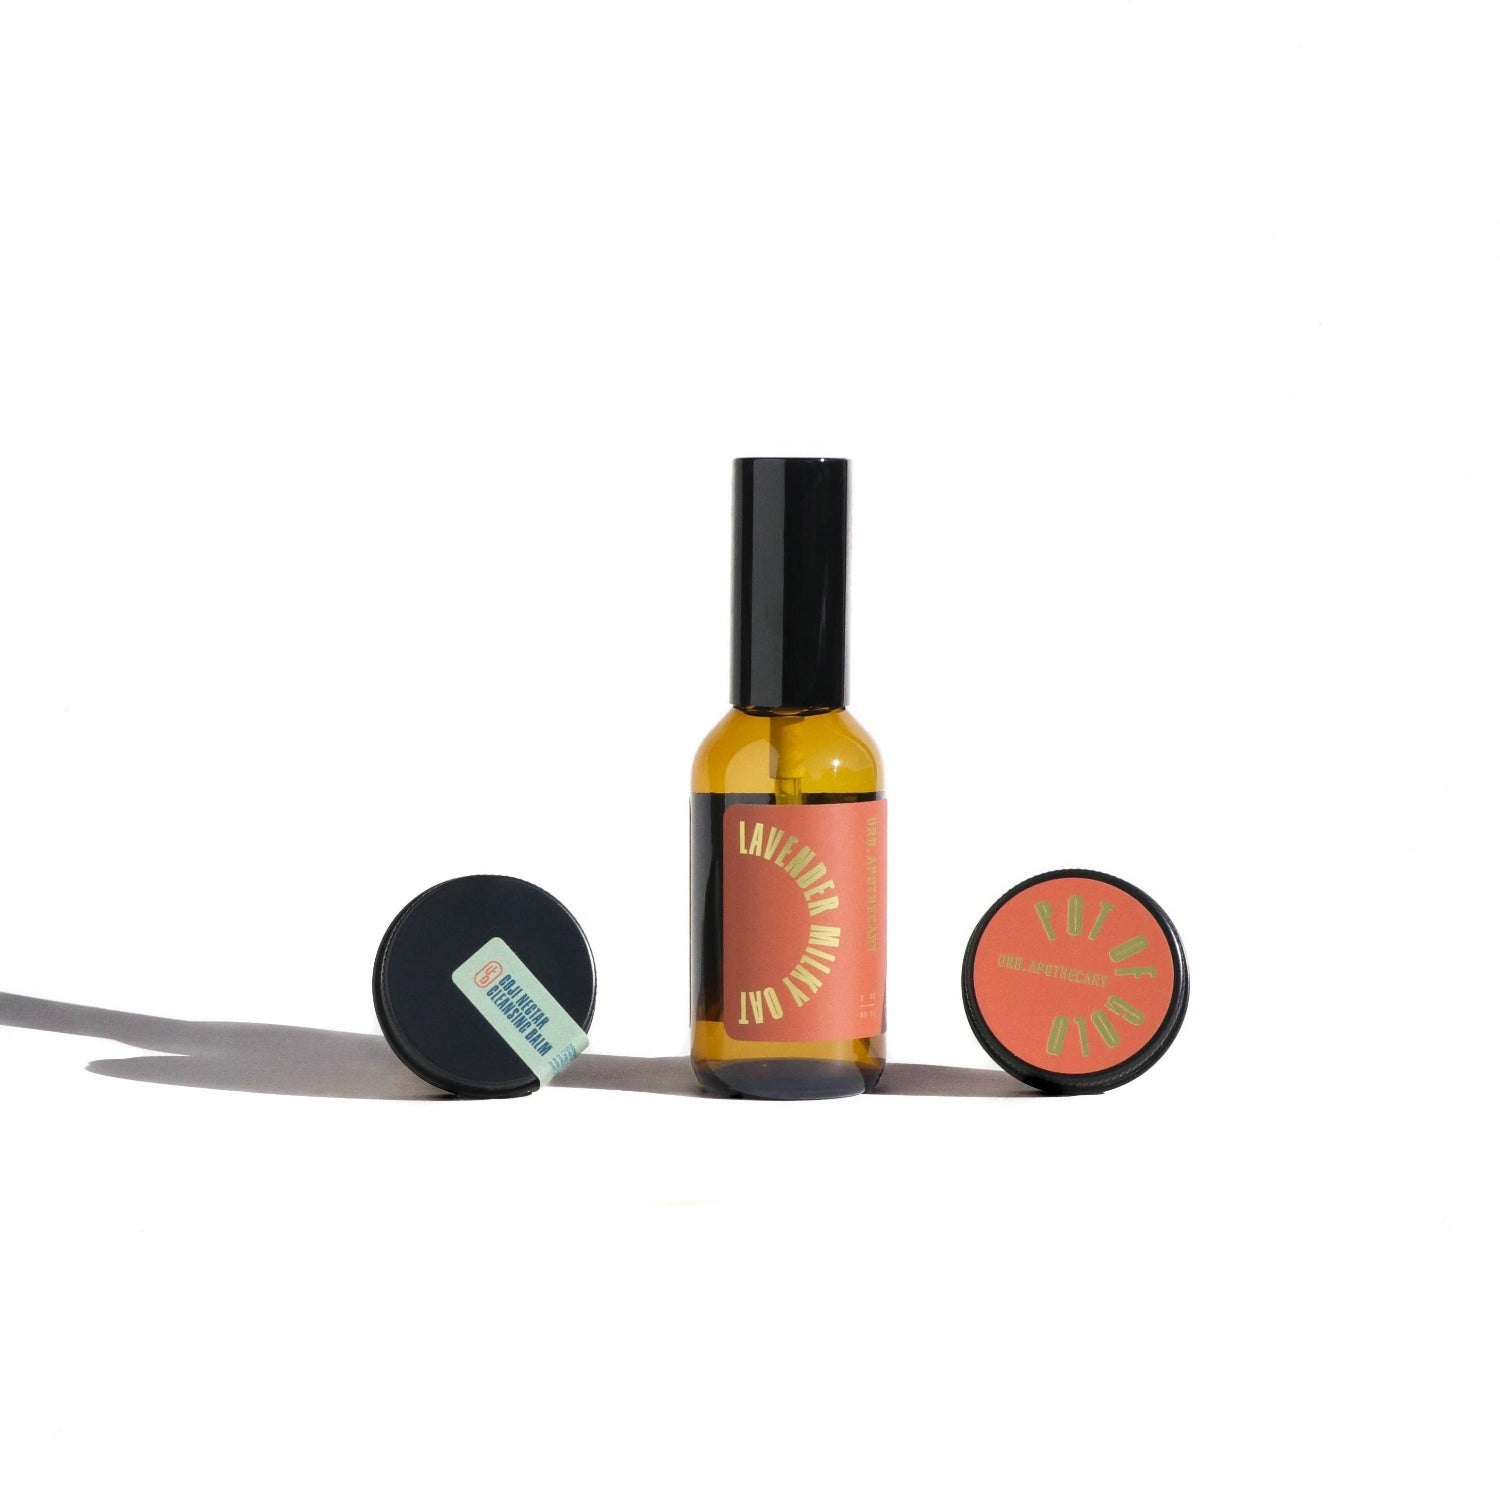 Daily Cleansing Bundle with Goji Nectar Cleansing Balm